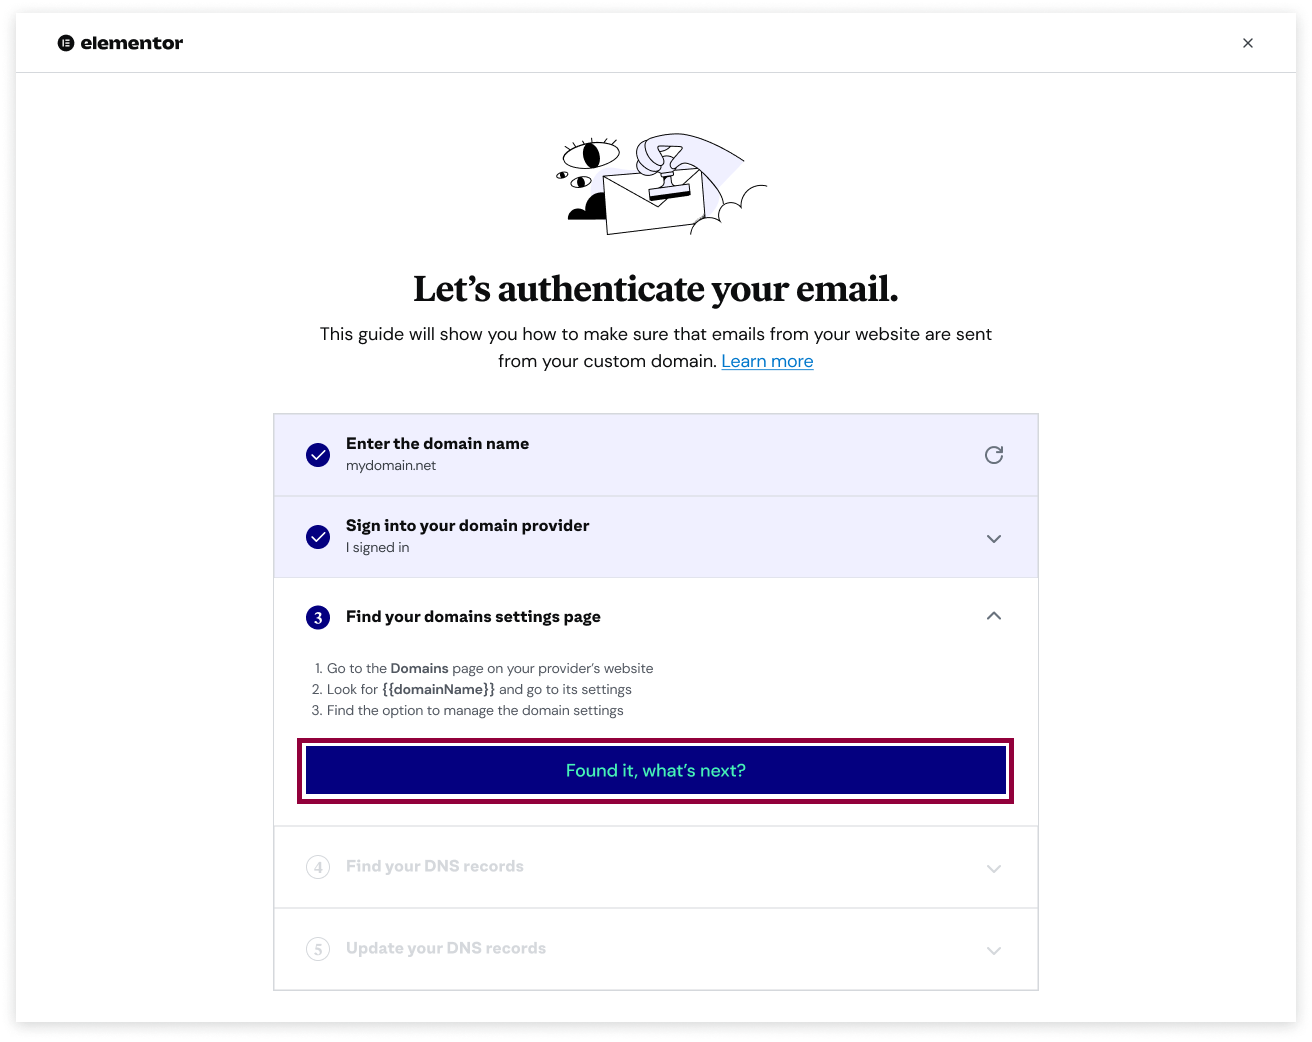 The Find your domain settings modal of the email authentication process